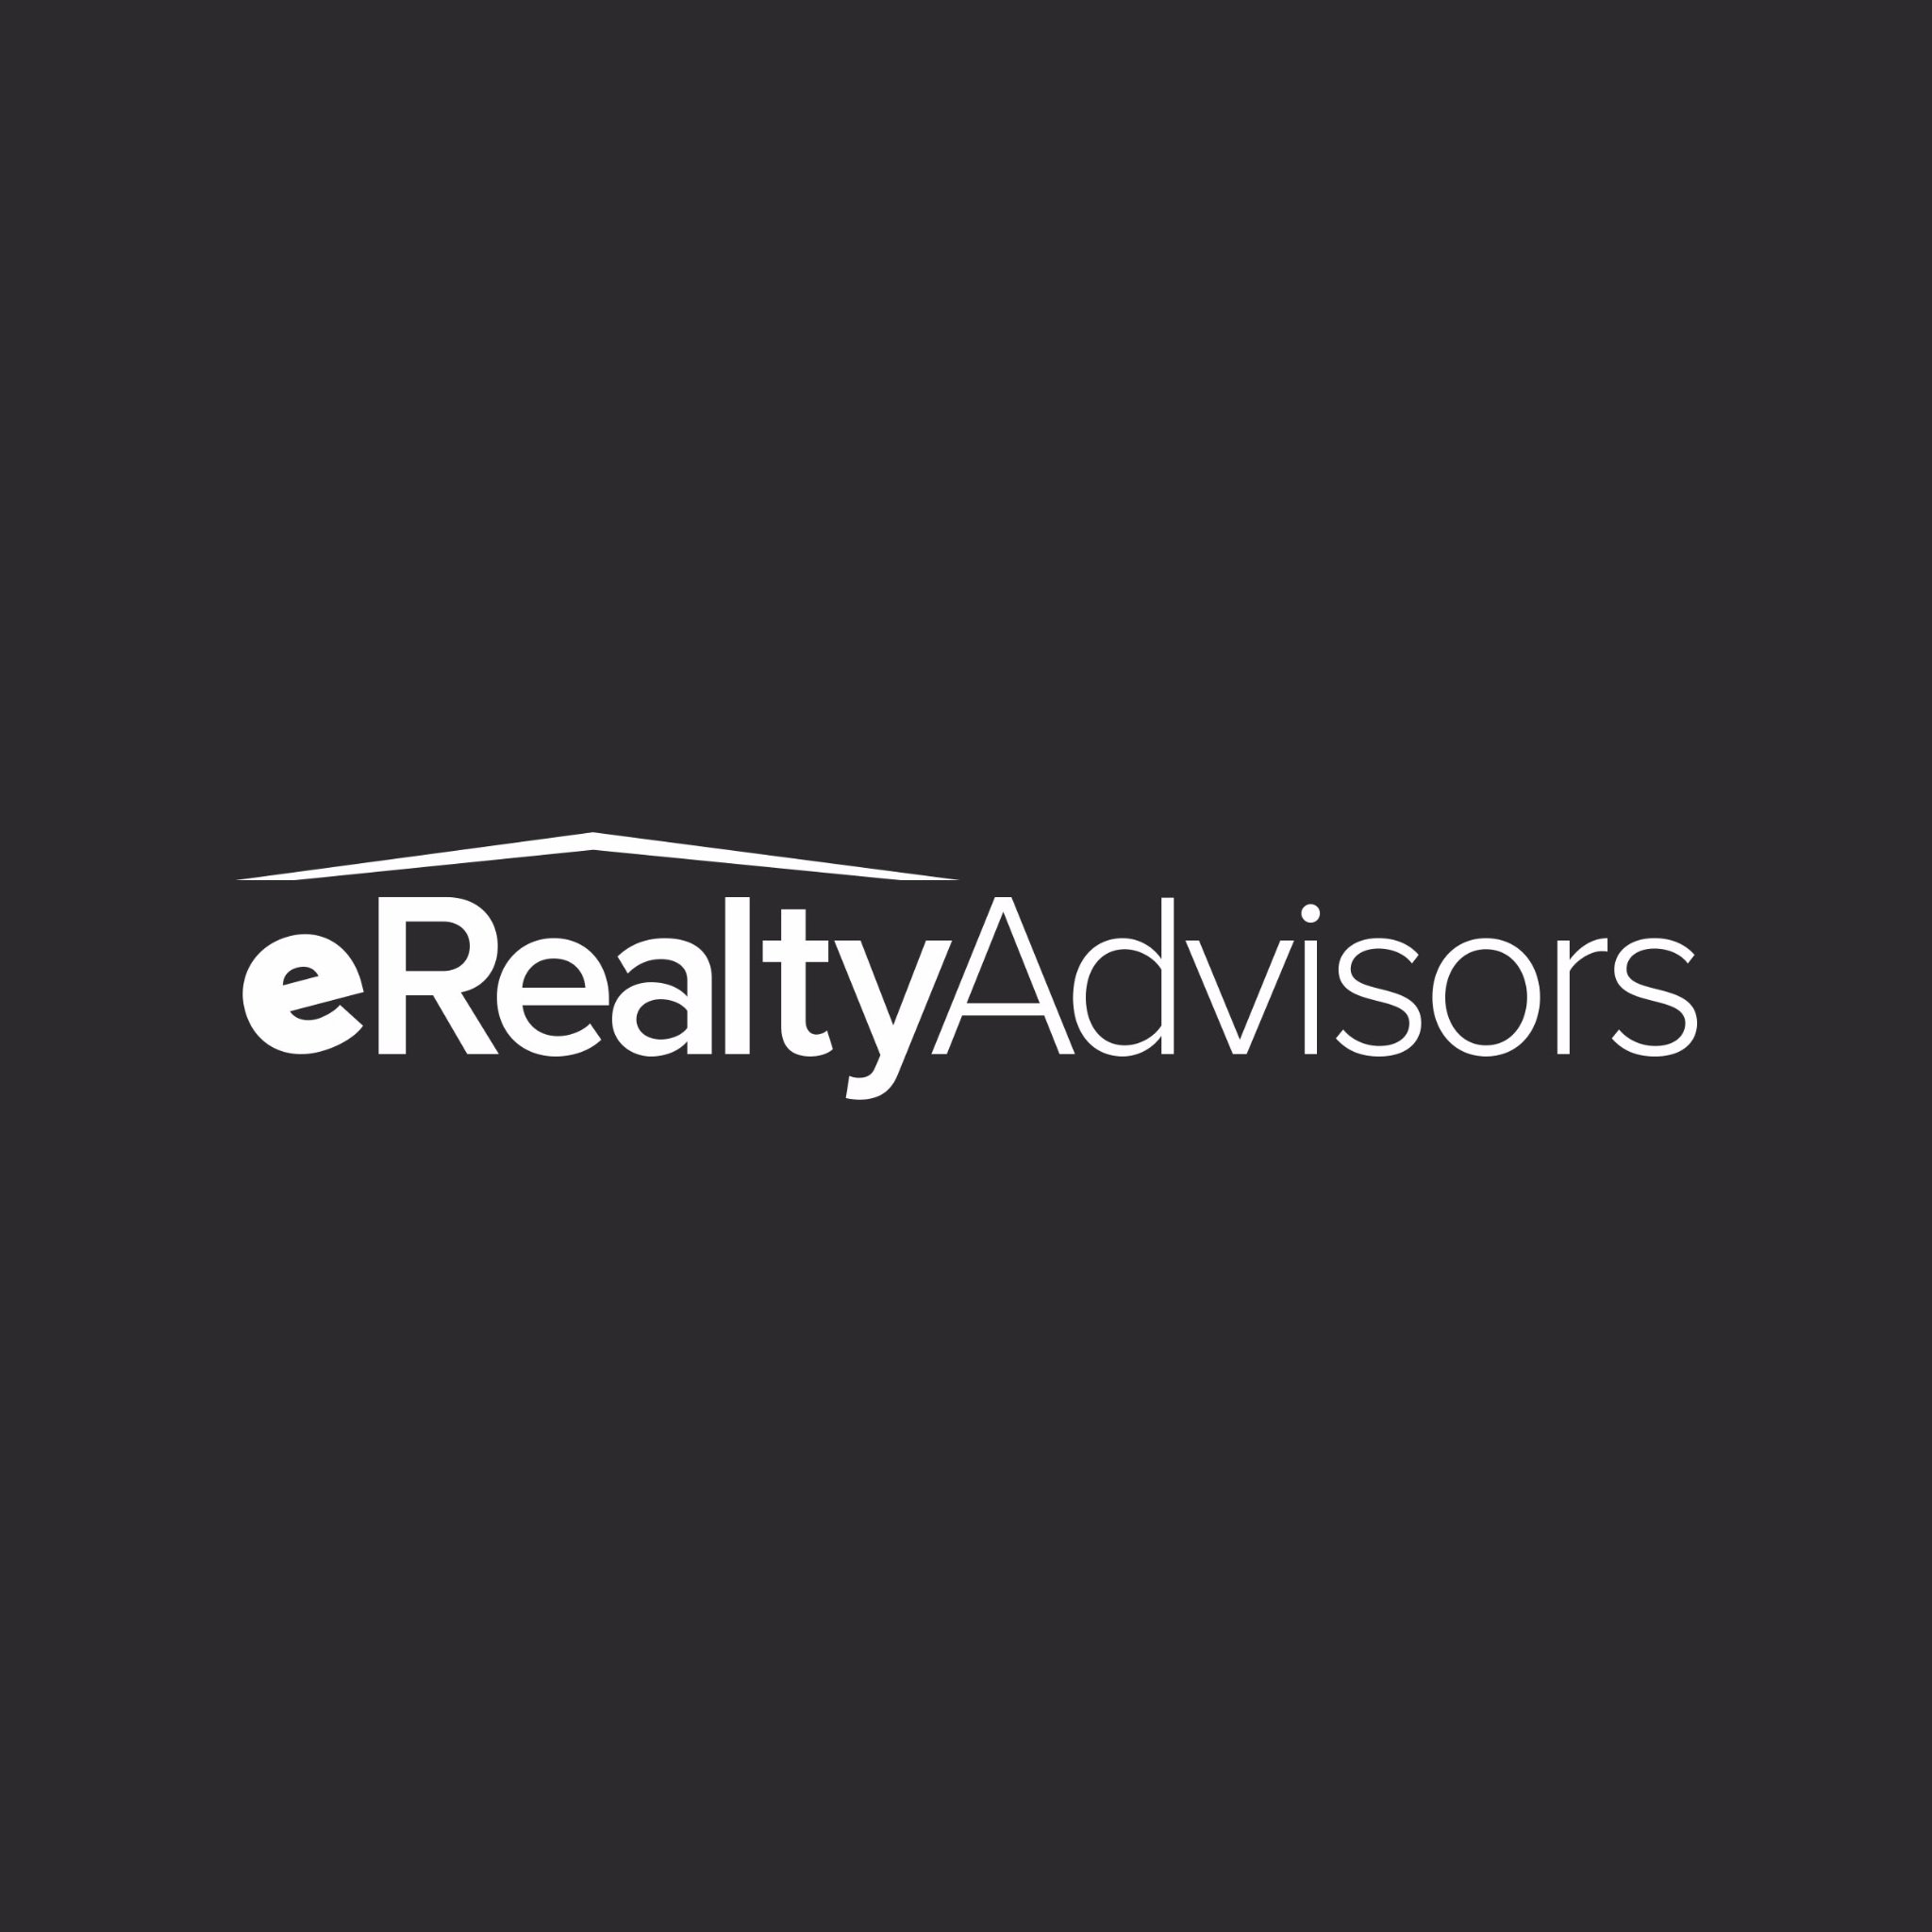 Established in New York by Richard Wolff and Stephen Apple, eRealty Advisors' fixed monthly plans allow real estate agents to maximize their earnings potential.